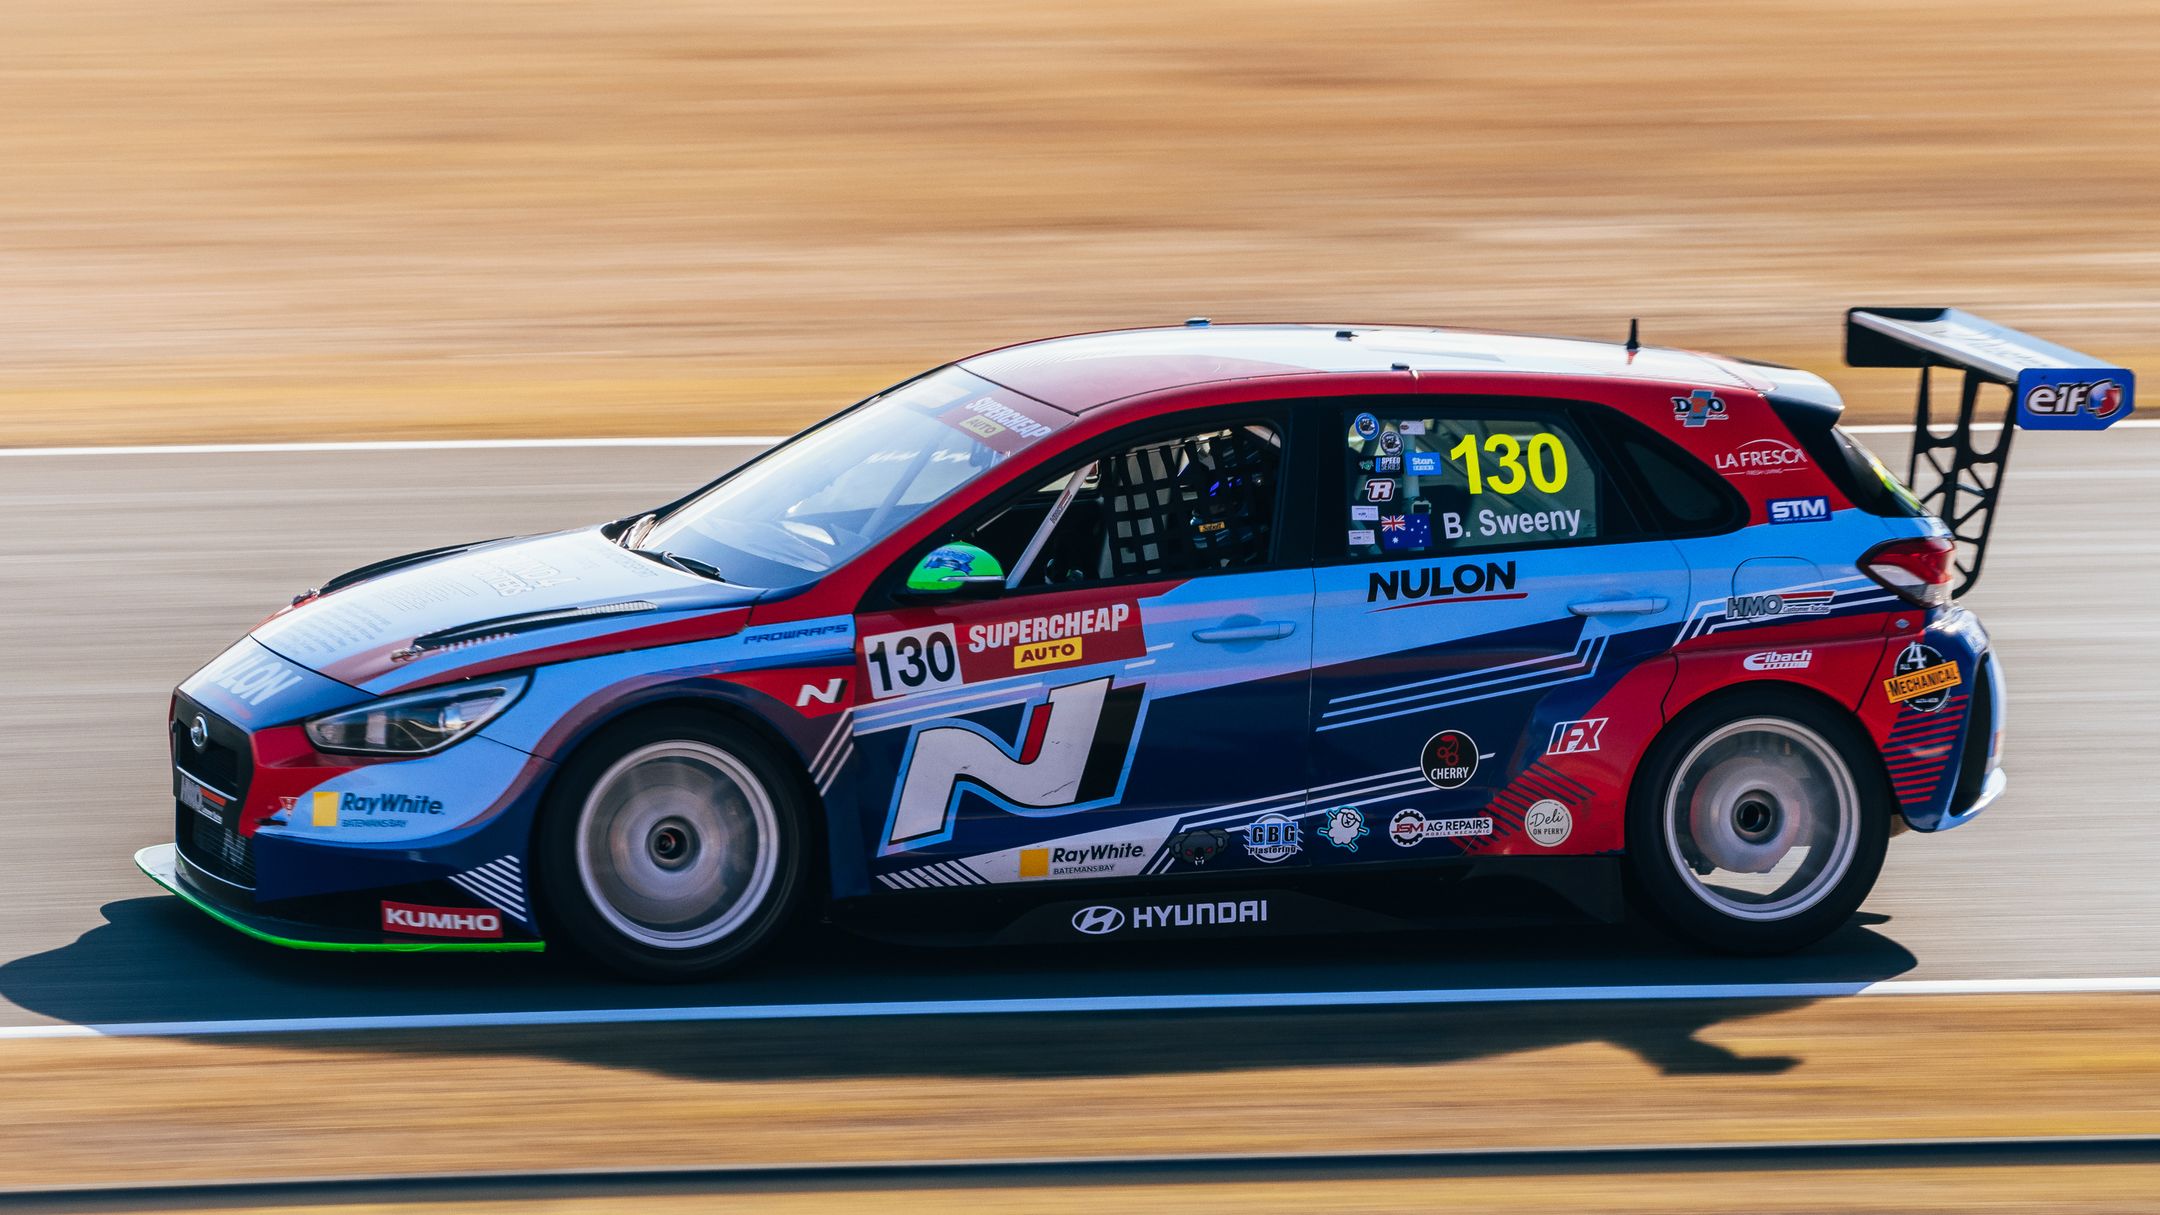 Bailey Sweeny was lucky not to go point-less in race one at Queensland Raceway.